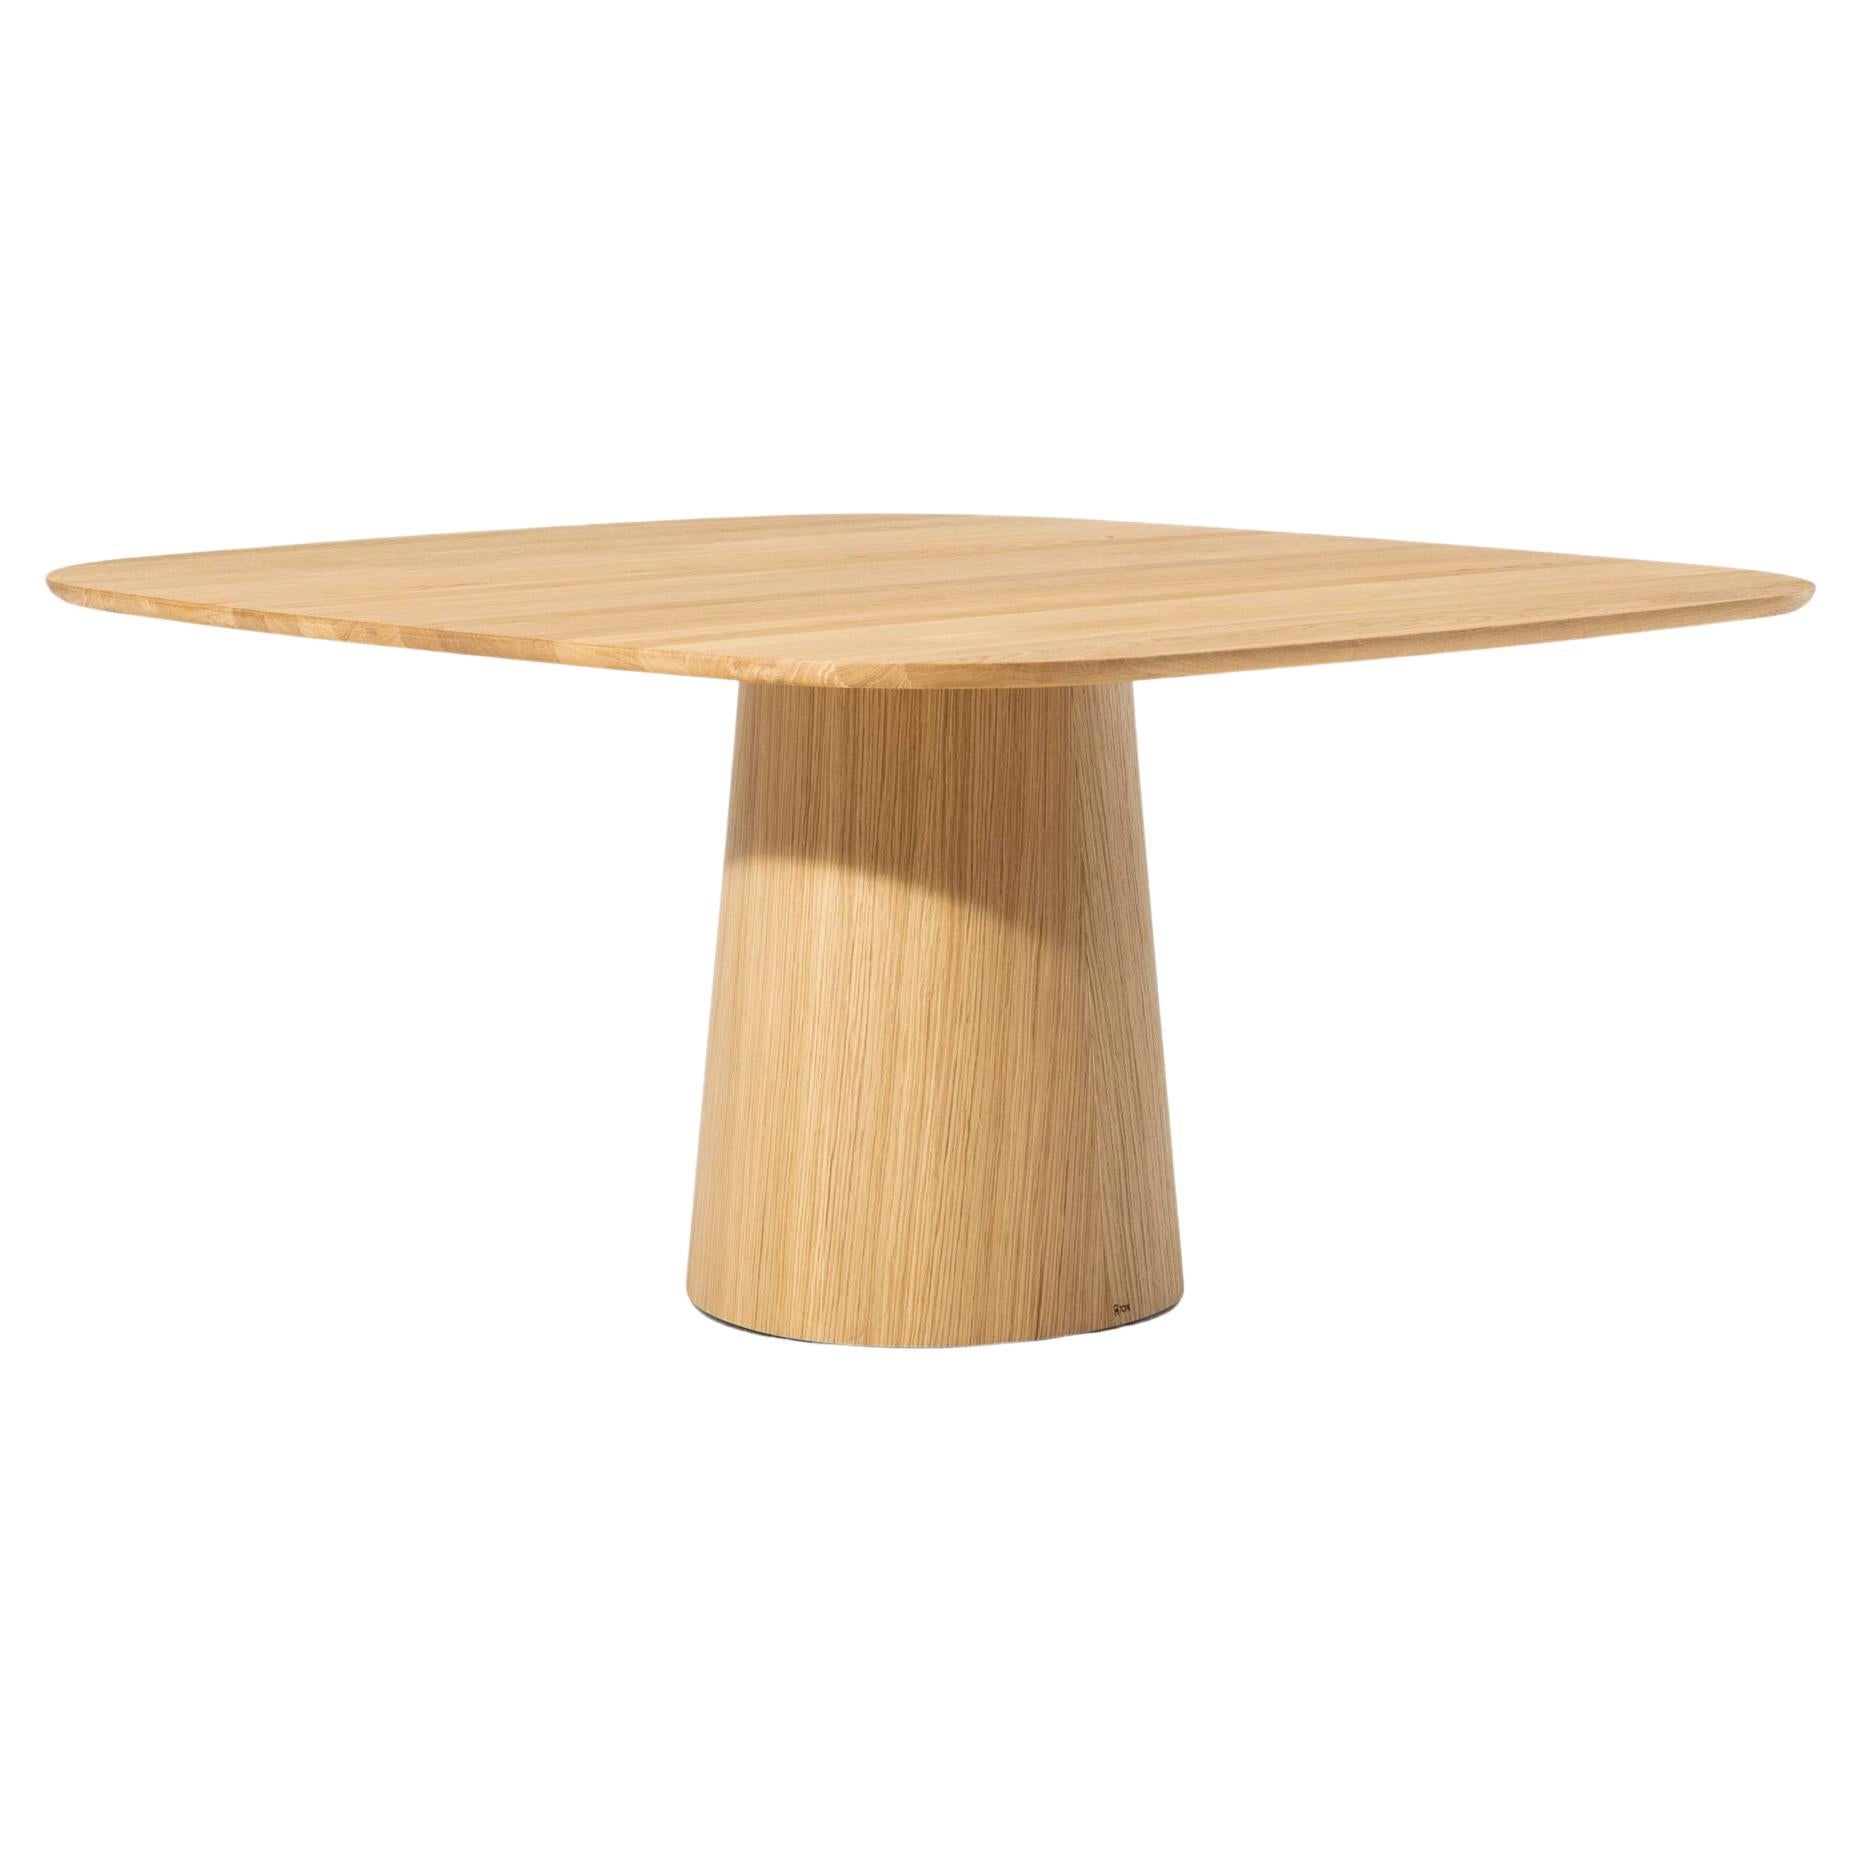 Contemporary Dining Table POV 462, Solid Oak or Walnut, Round or Square, 120 For Sale